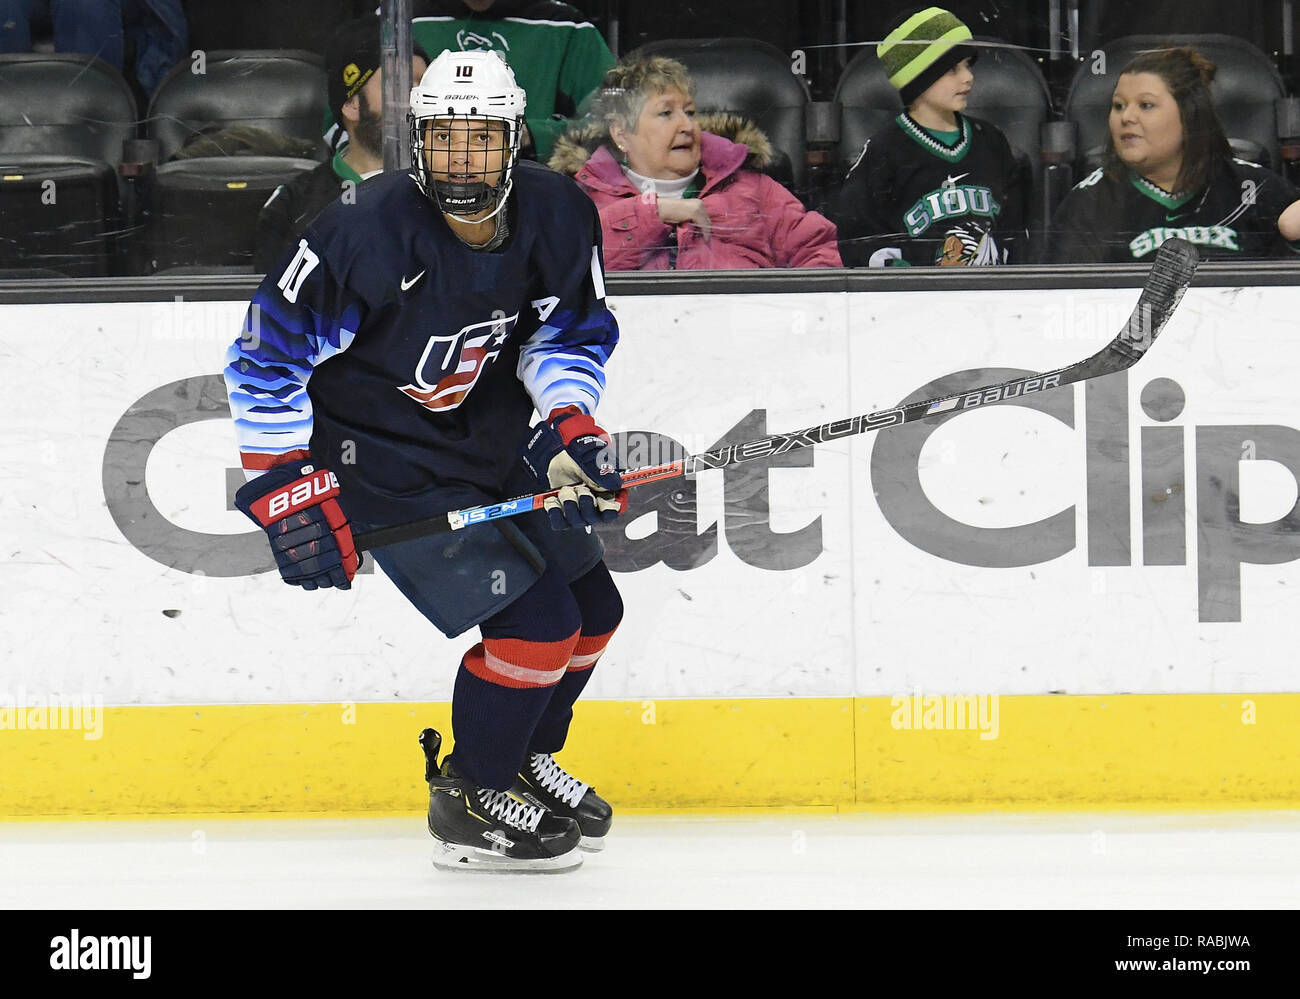 December 29, 2018 US National Under 18 team defenseman Marshall Warren (10) takes part in a pre-game skate before an exhibition hockey game against the University of North Dakota Fighting Hawks at Ralph Engelstad Arena in Grand Forks, ND. Photo by Russell Hons/CSM Stock Photo